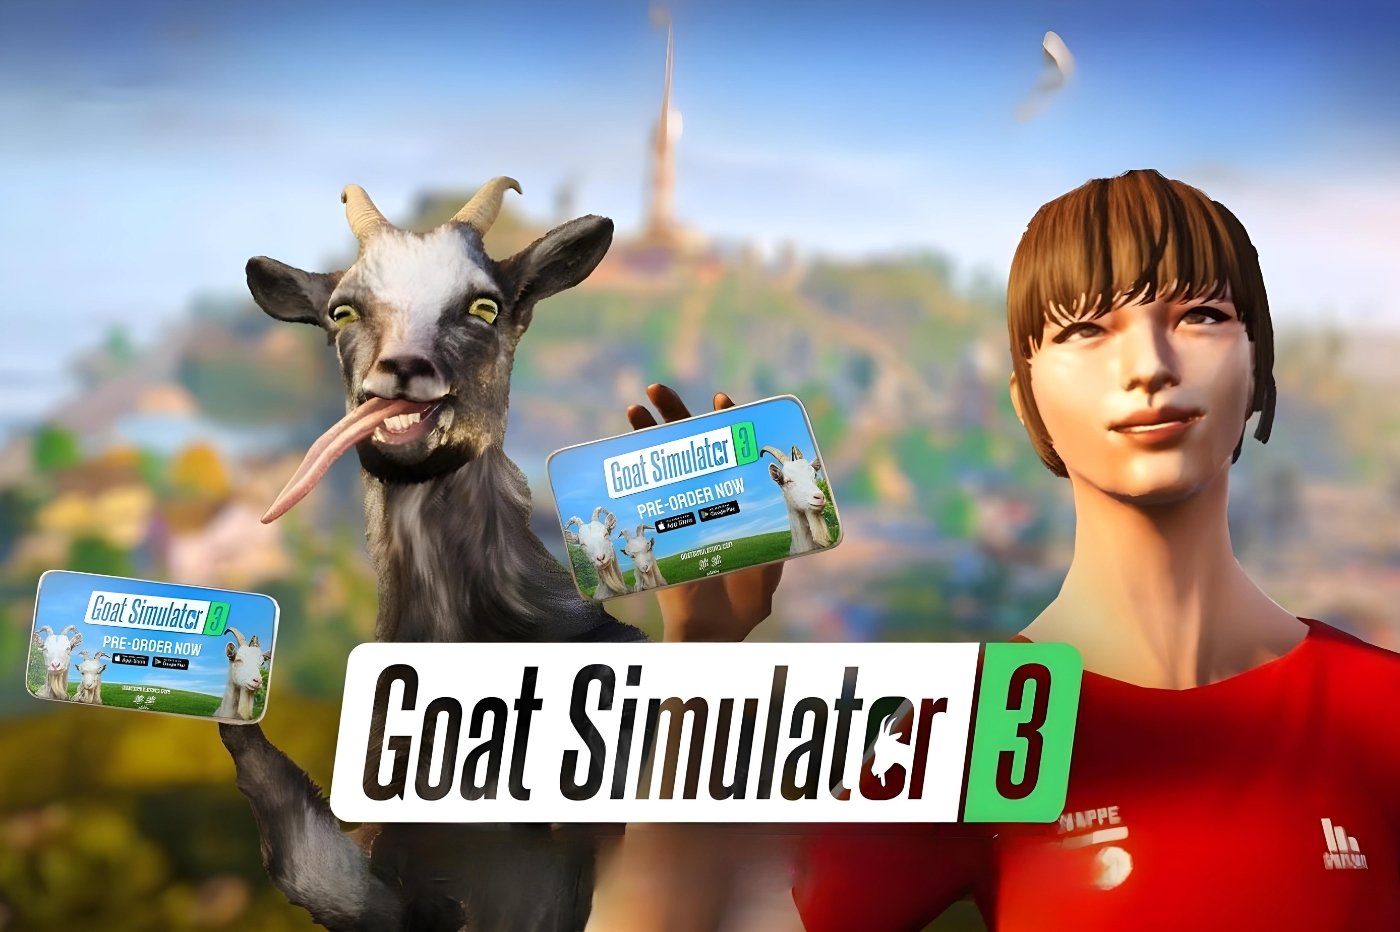 Goat simulator by iphon.fr